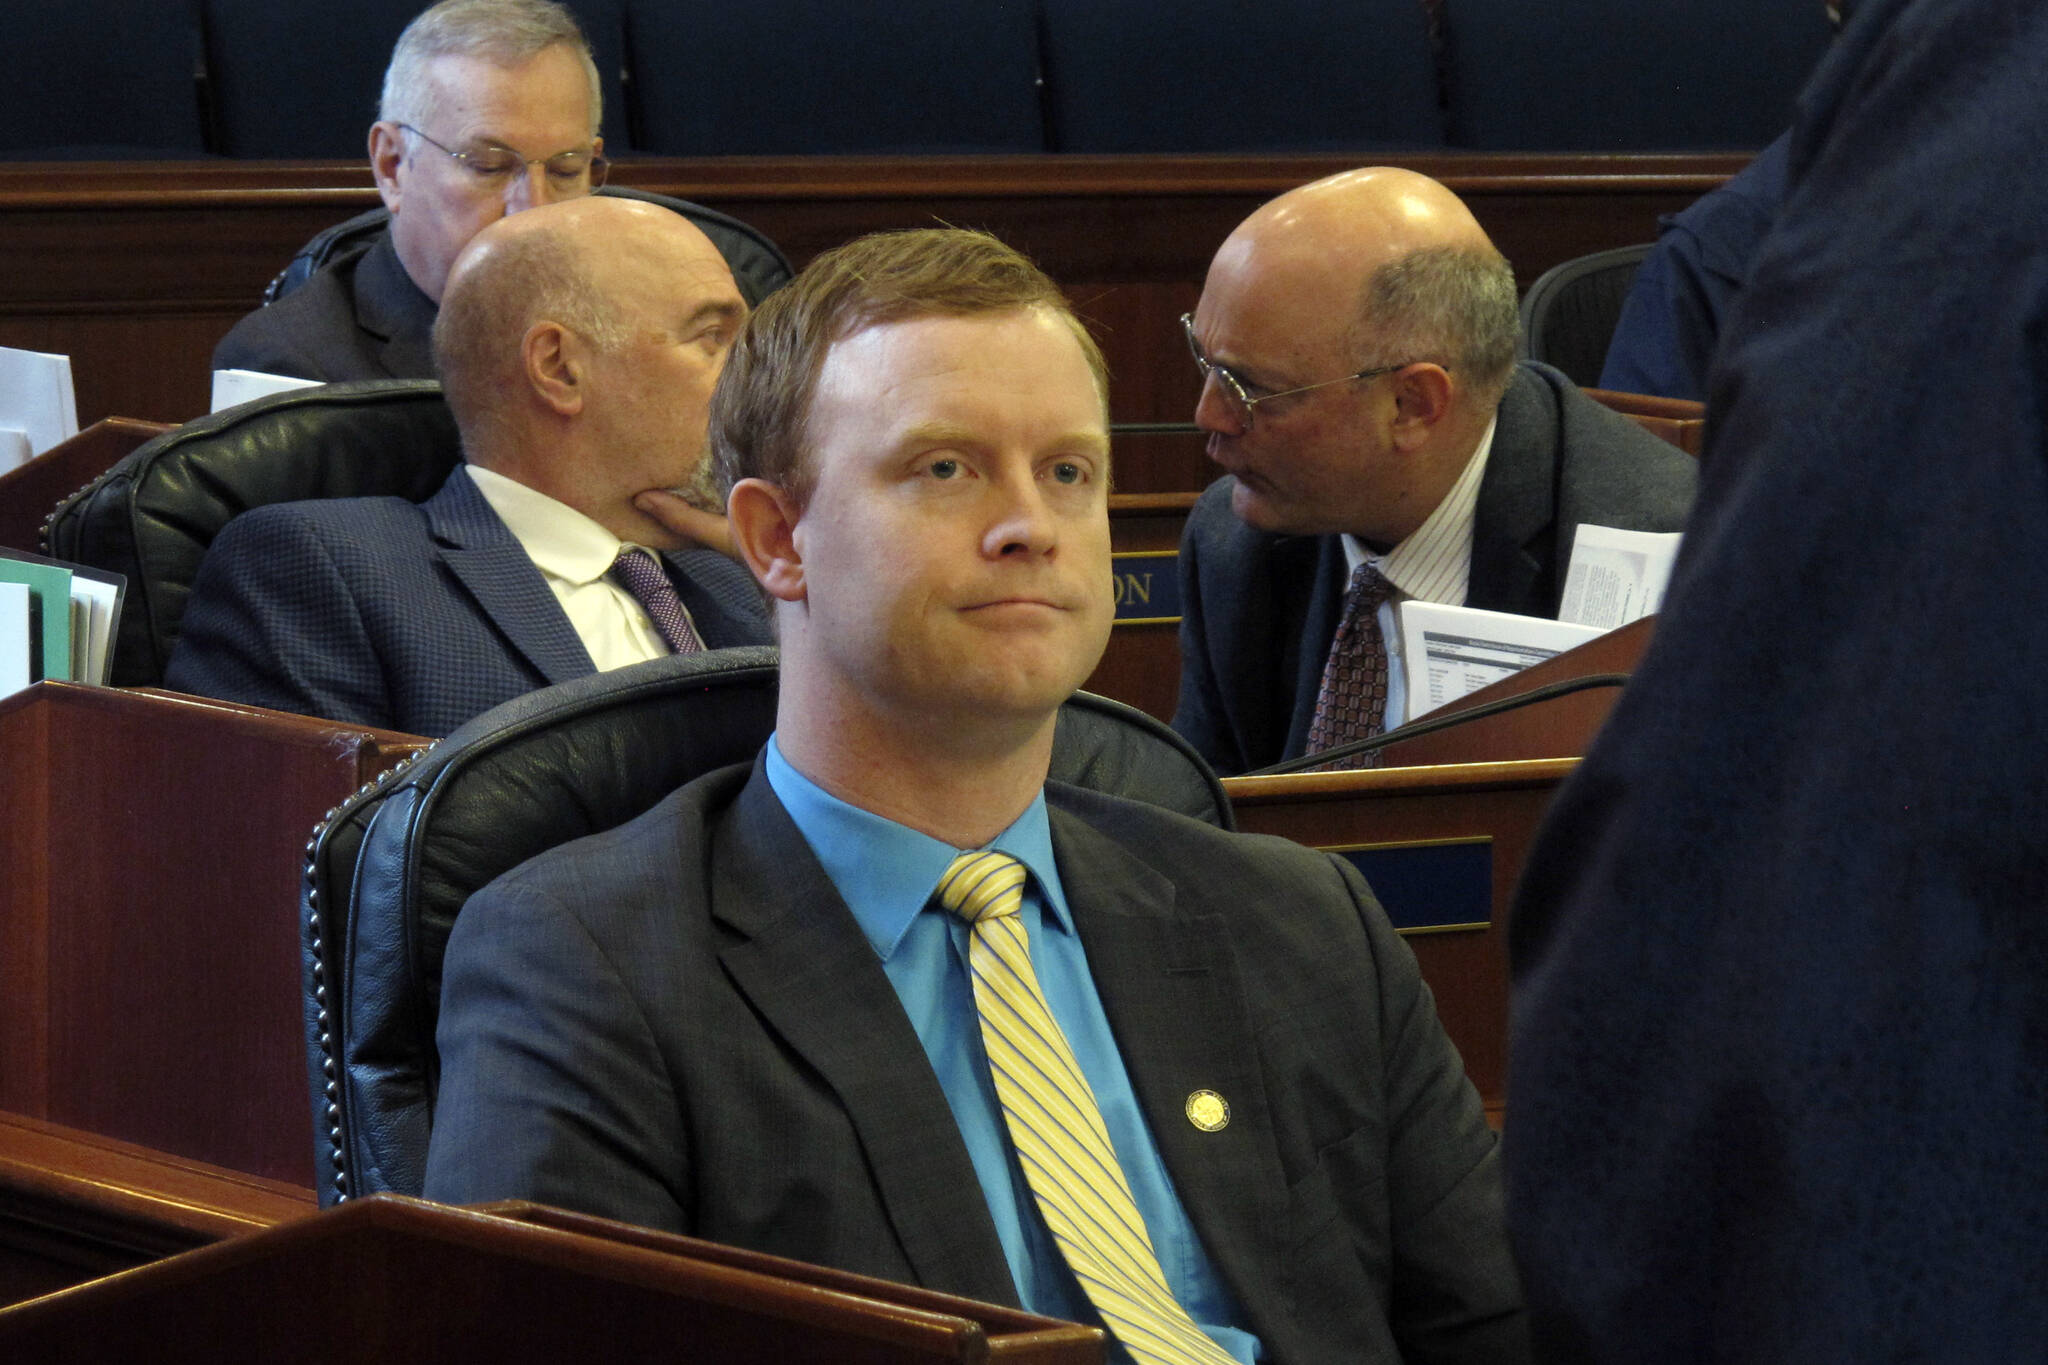 Alaska state Rep. David Eastman, R-Wasilla, sits in the House on April 29, 2022, in Juneau, Alaska. Eastman, accused of violating the state constitution’s disloyalty clause over his lifetime membership in Oath Keepers, has not condemned the organization in the wake of the Jan. 6, 2021, insurrection at the U.S Capitol. “No, I generally don’t condemn groups,” Eastman, a Wasilla Republican, said during his bench hearing on Thursday, Dec. 15, 2022, his second day on the witness stand. (AP Photo / Becky Bohrer)